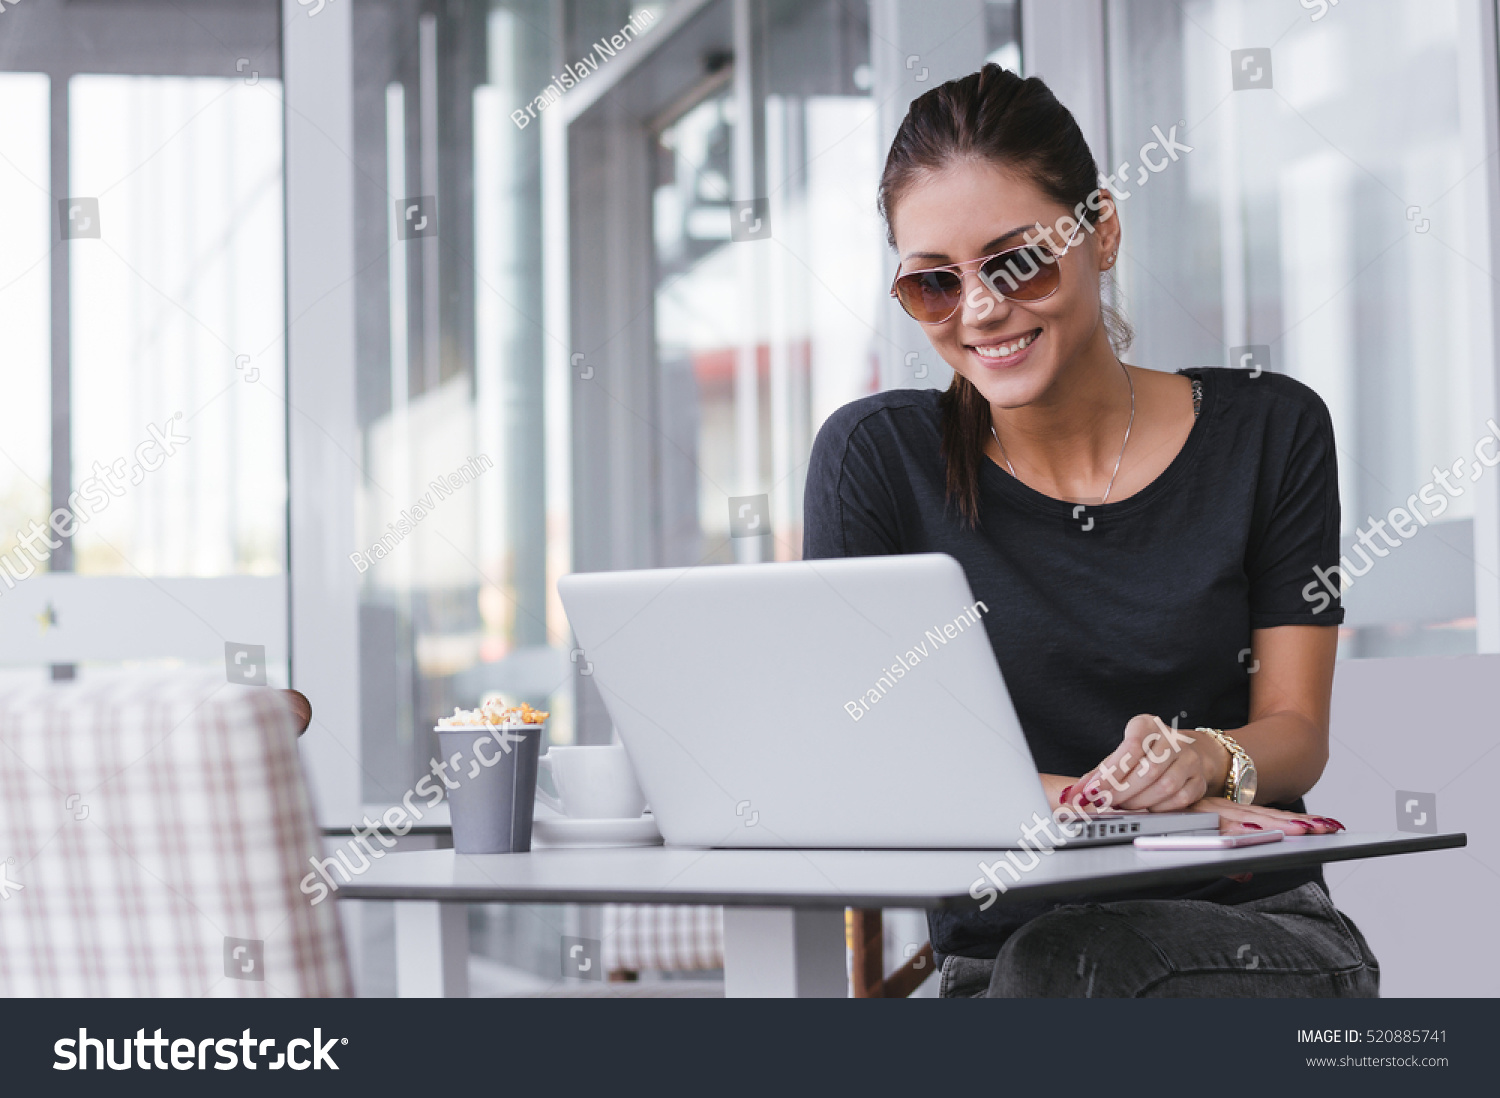 Young business woman with laptop #520885741